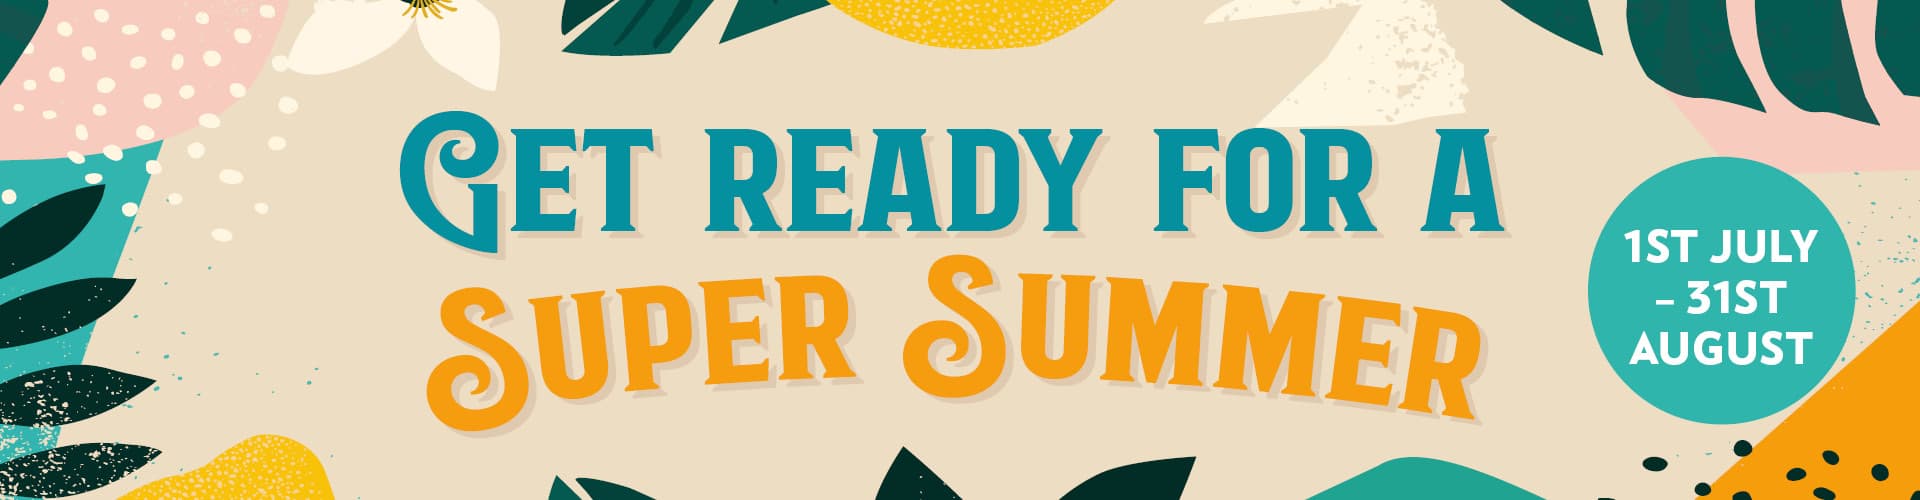 Super Summer at The Red Lion Hotel Pub in Luton